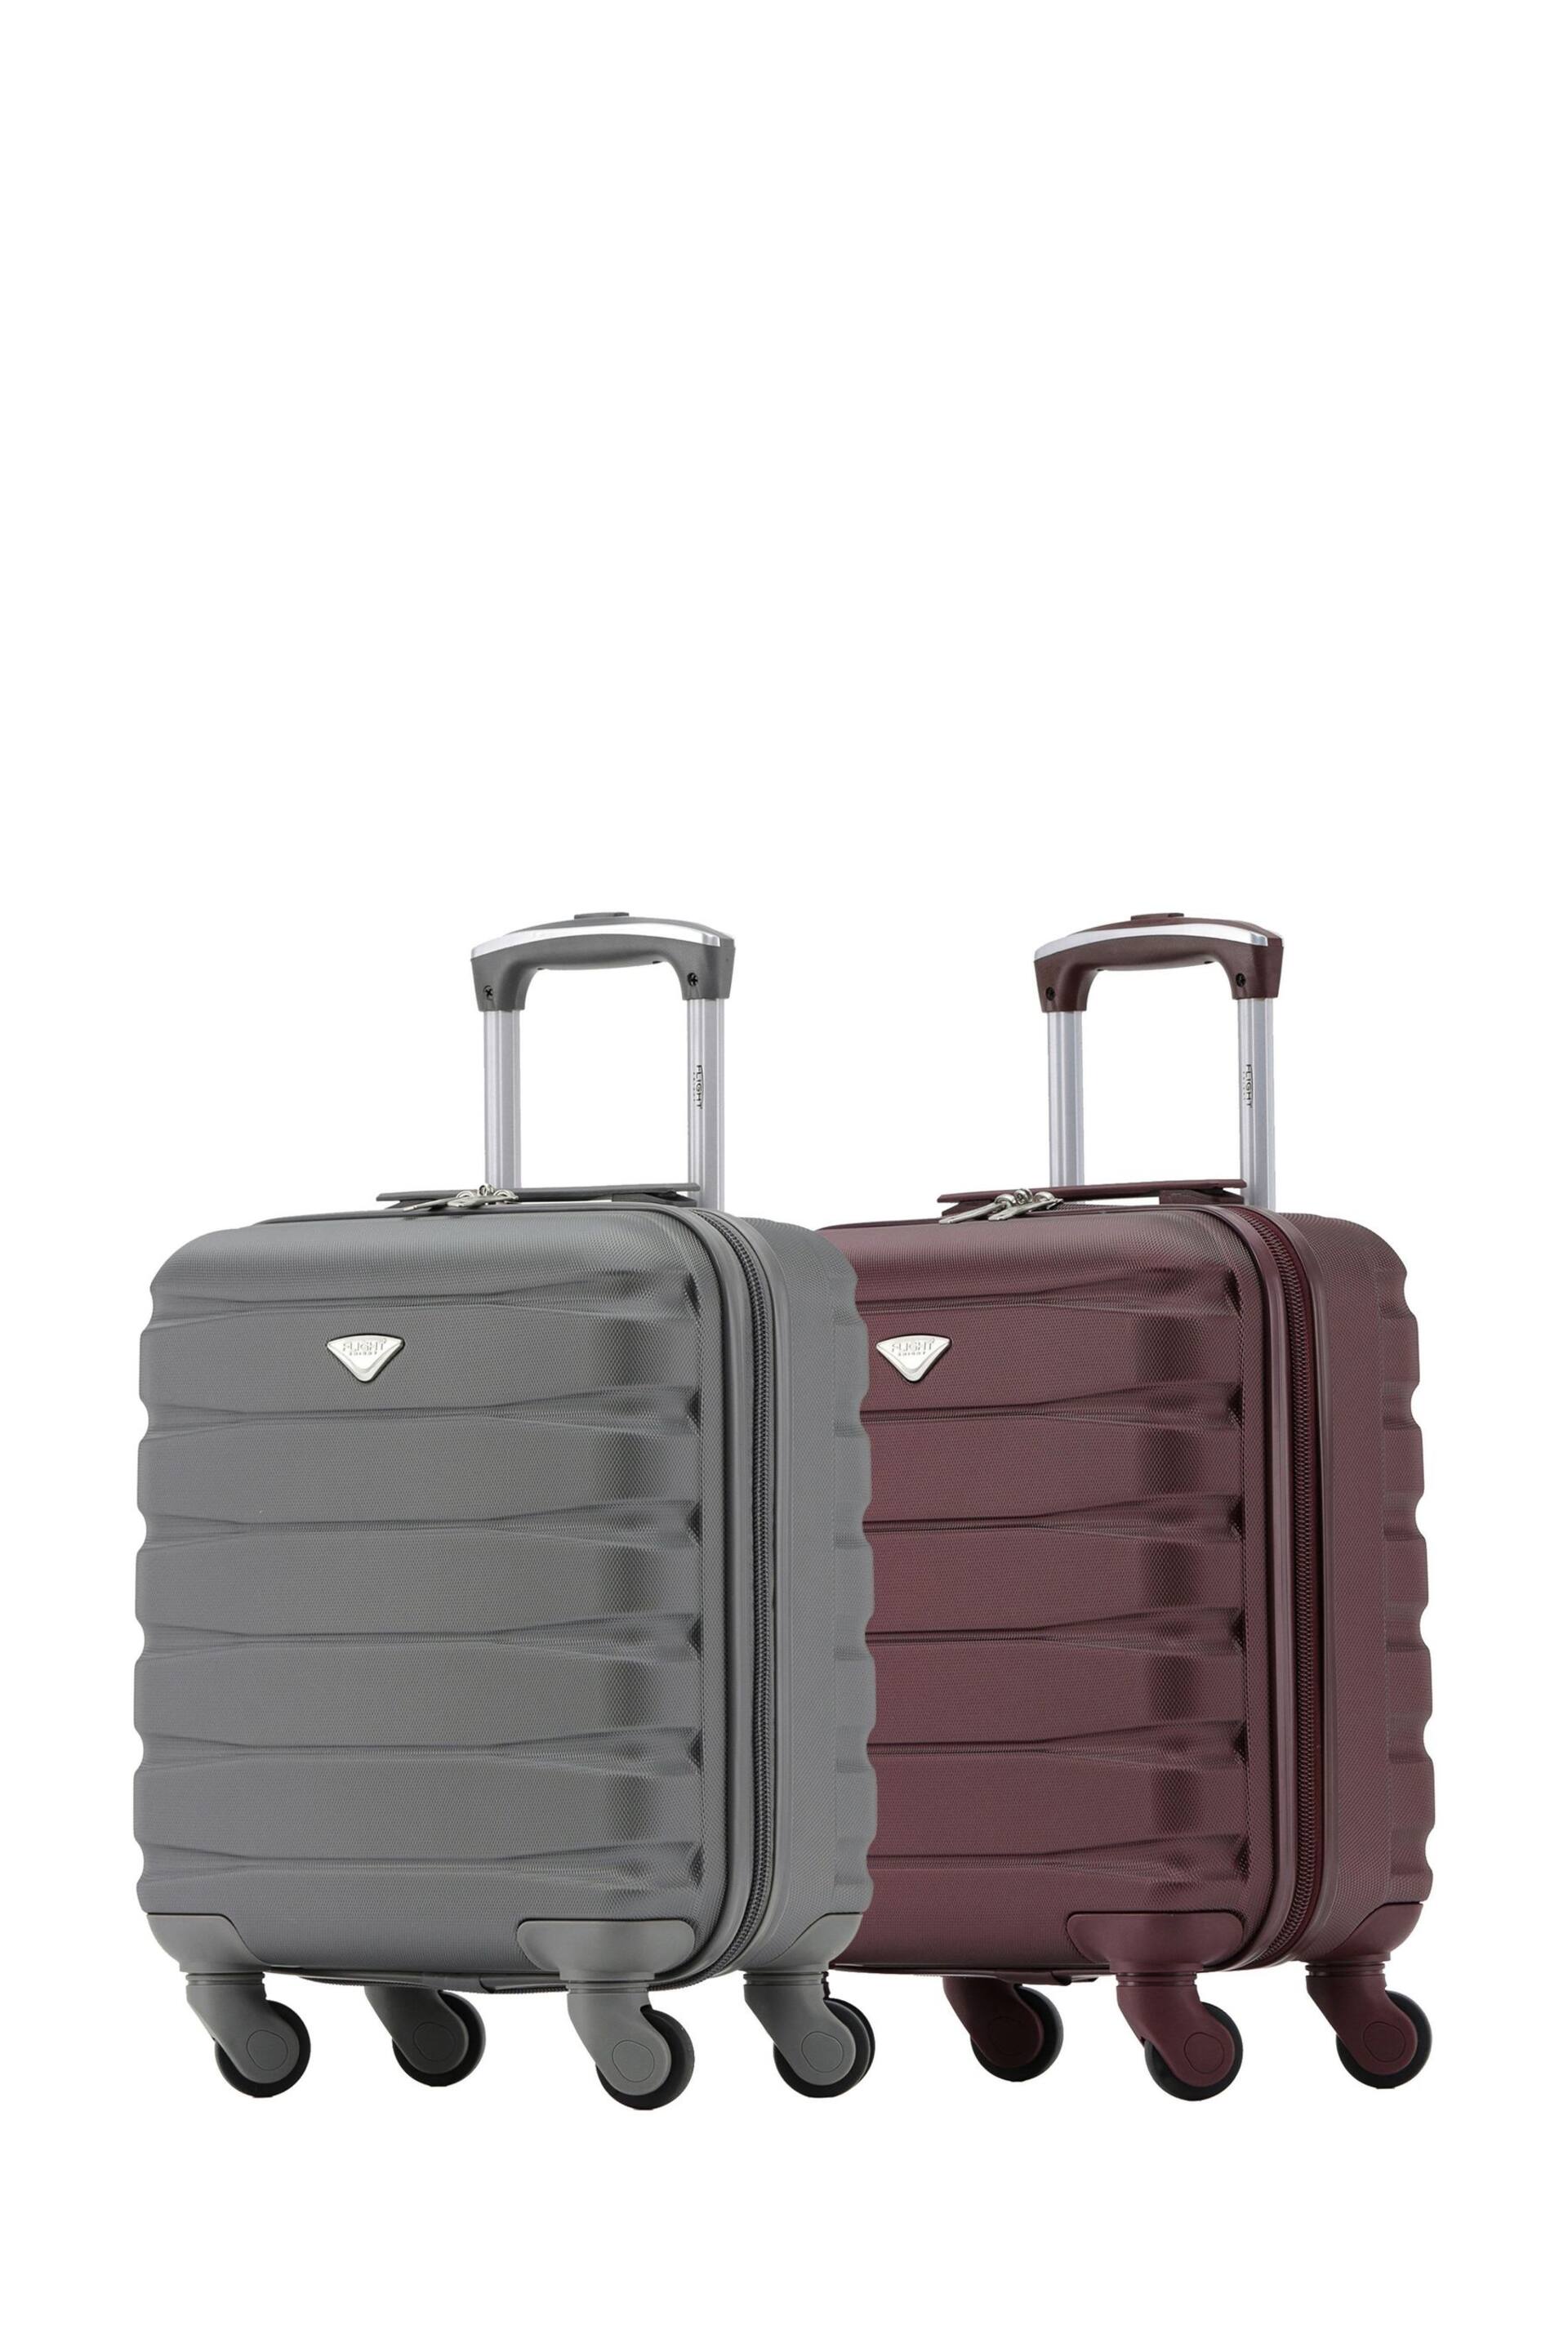 Flight Knight EasyJet Underseat 45x36x20cm 4 Wheel ABS Hard Case Cabin Carry On Suitcase Set Of 2 - Image 2 of 3